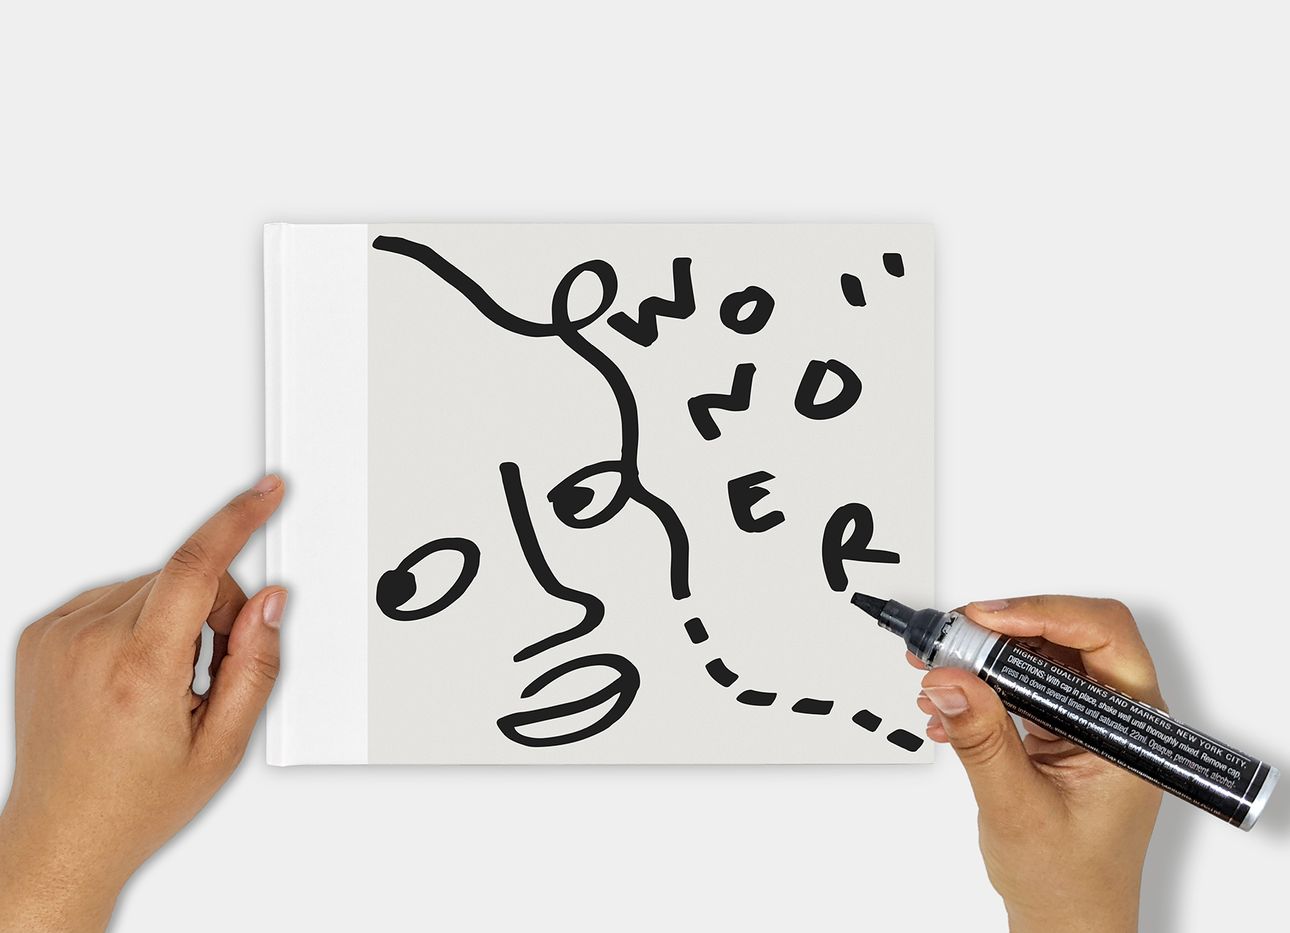 Shantell Martin's book, Wonder, with her hands holding a marker above it.